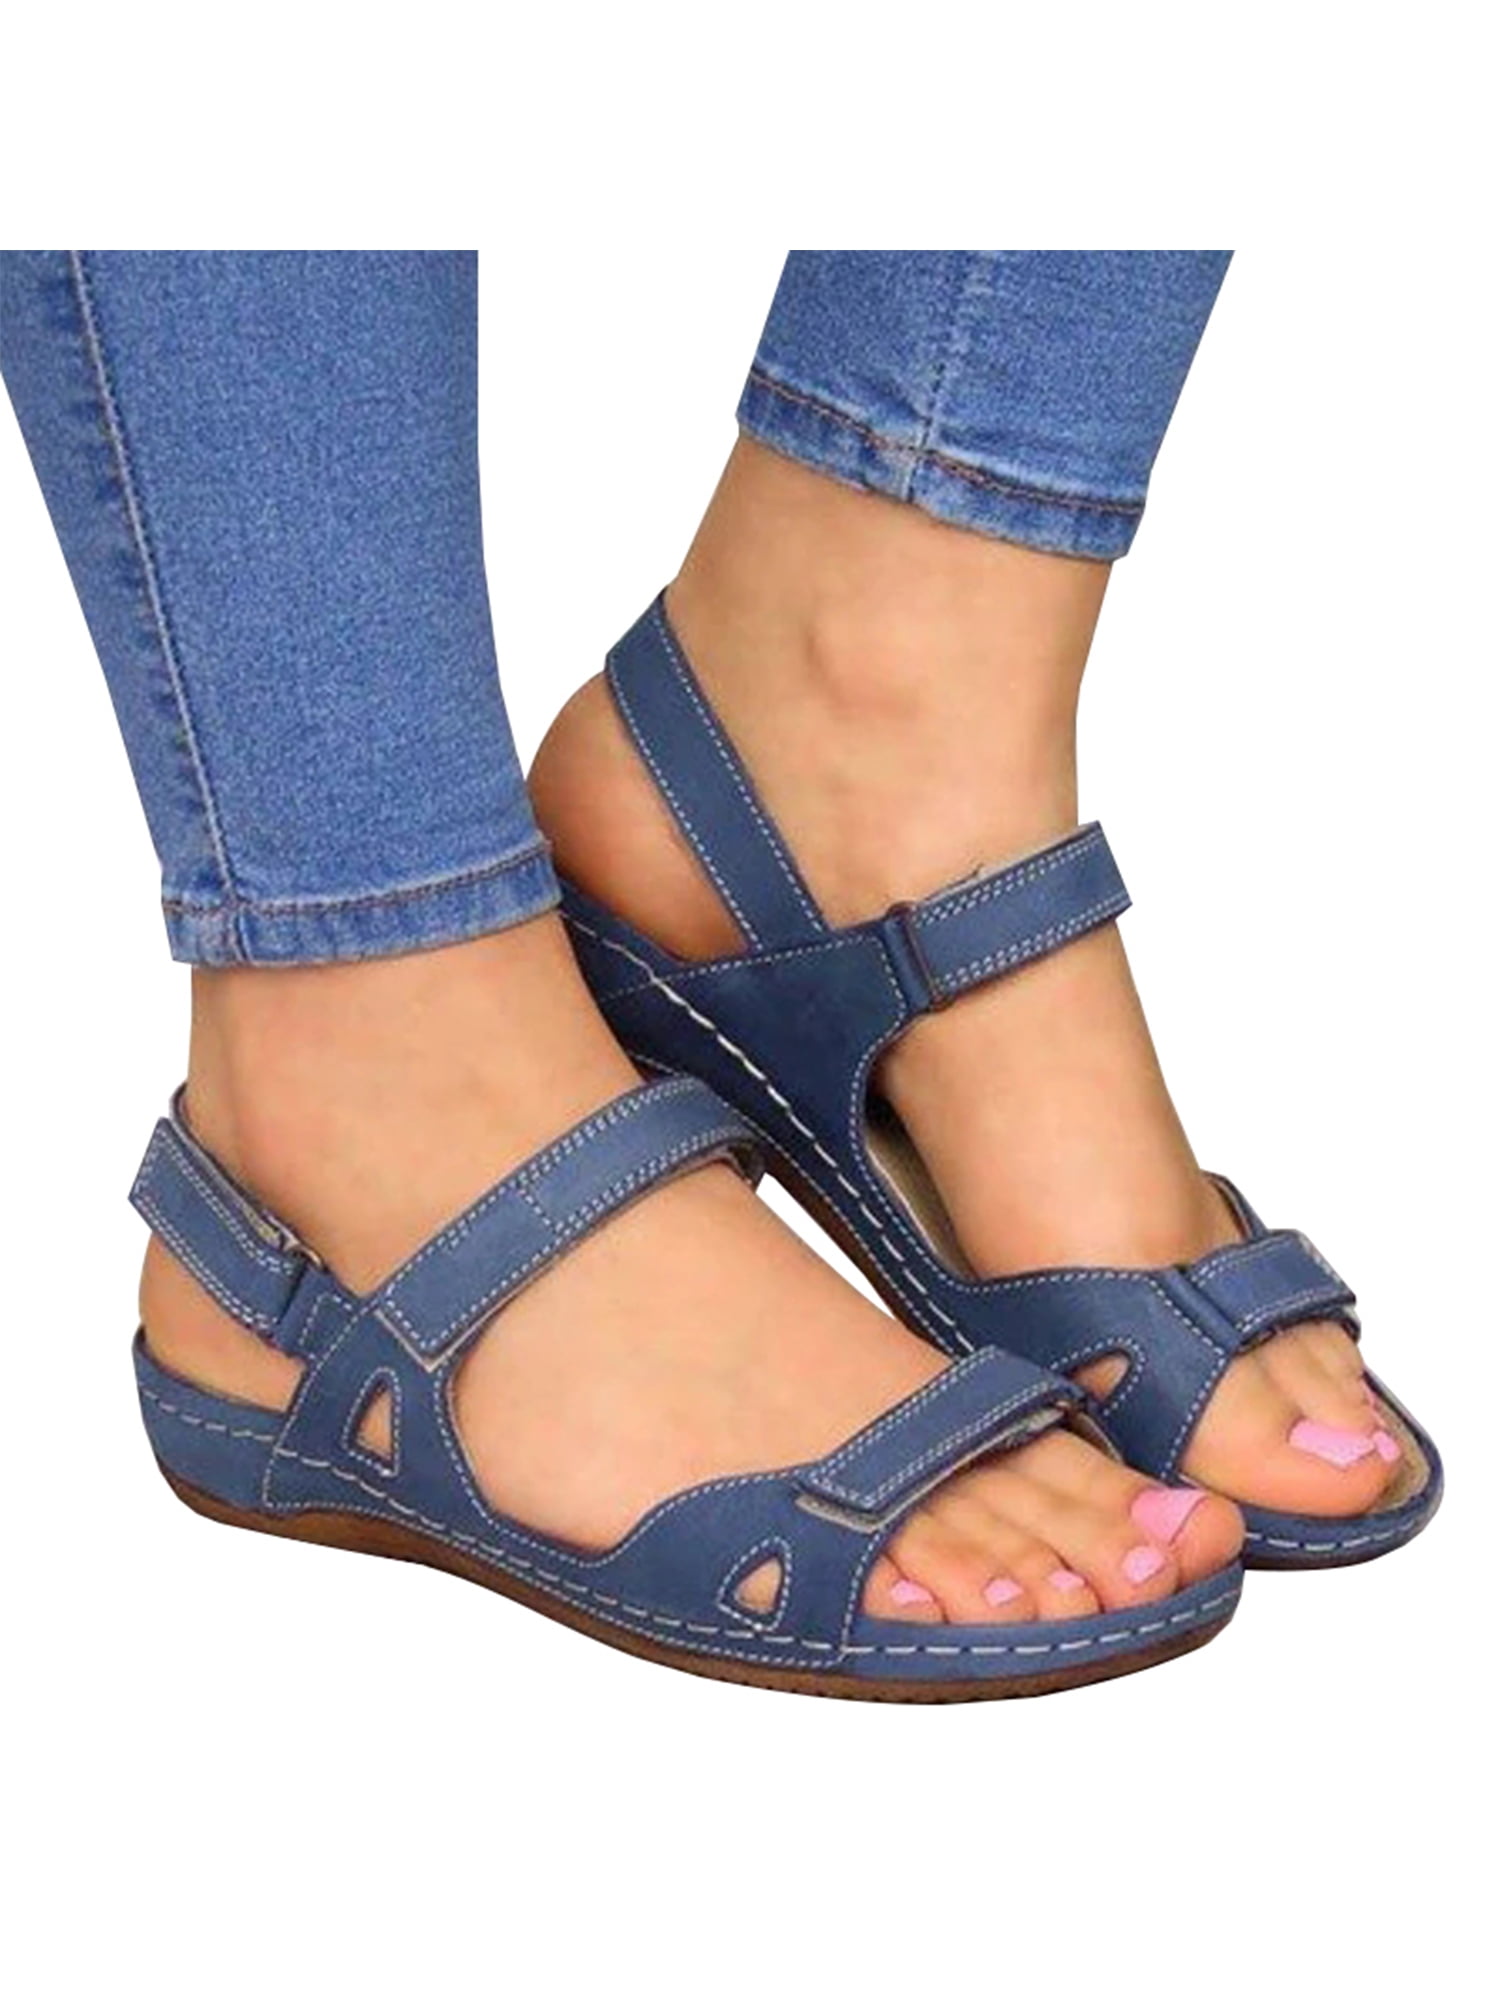 Womens Summer Ankle Strap Flat Casual Open Toe Shoes Hollow Beach Velcro Sandals